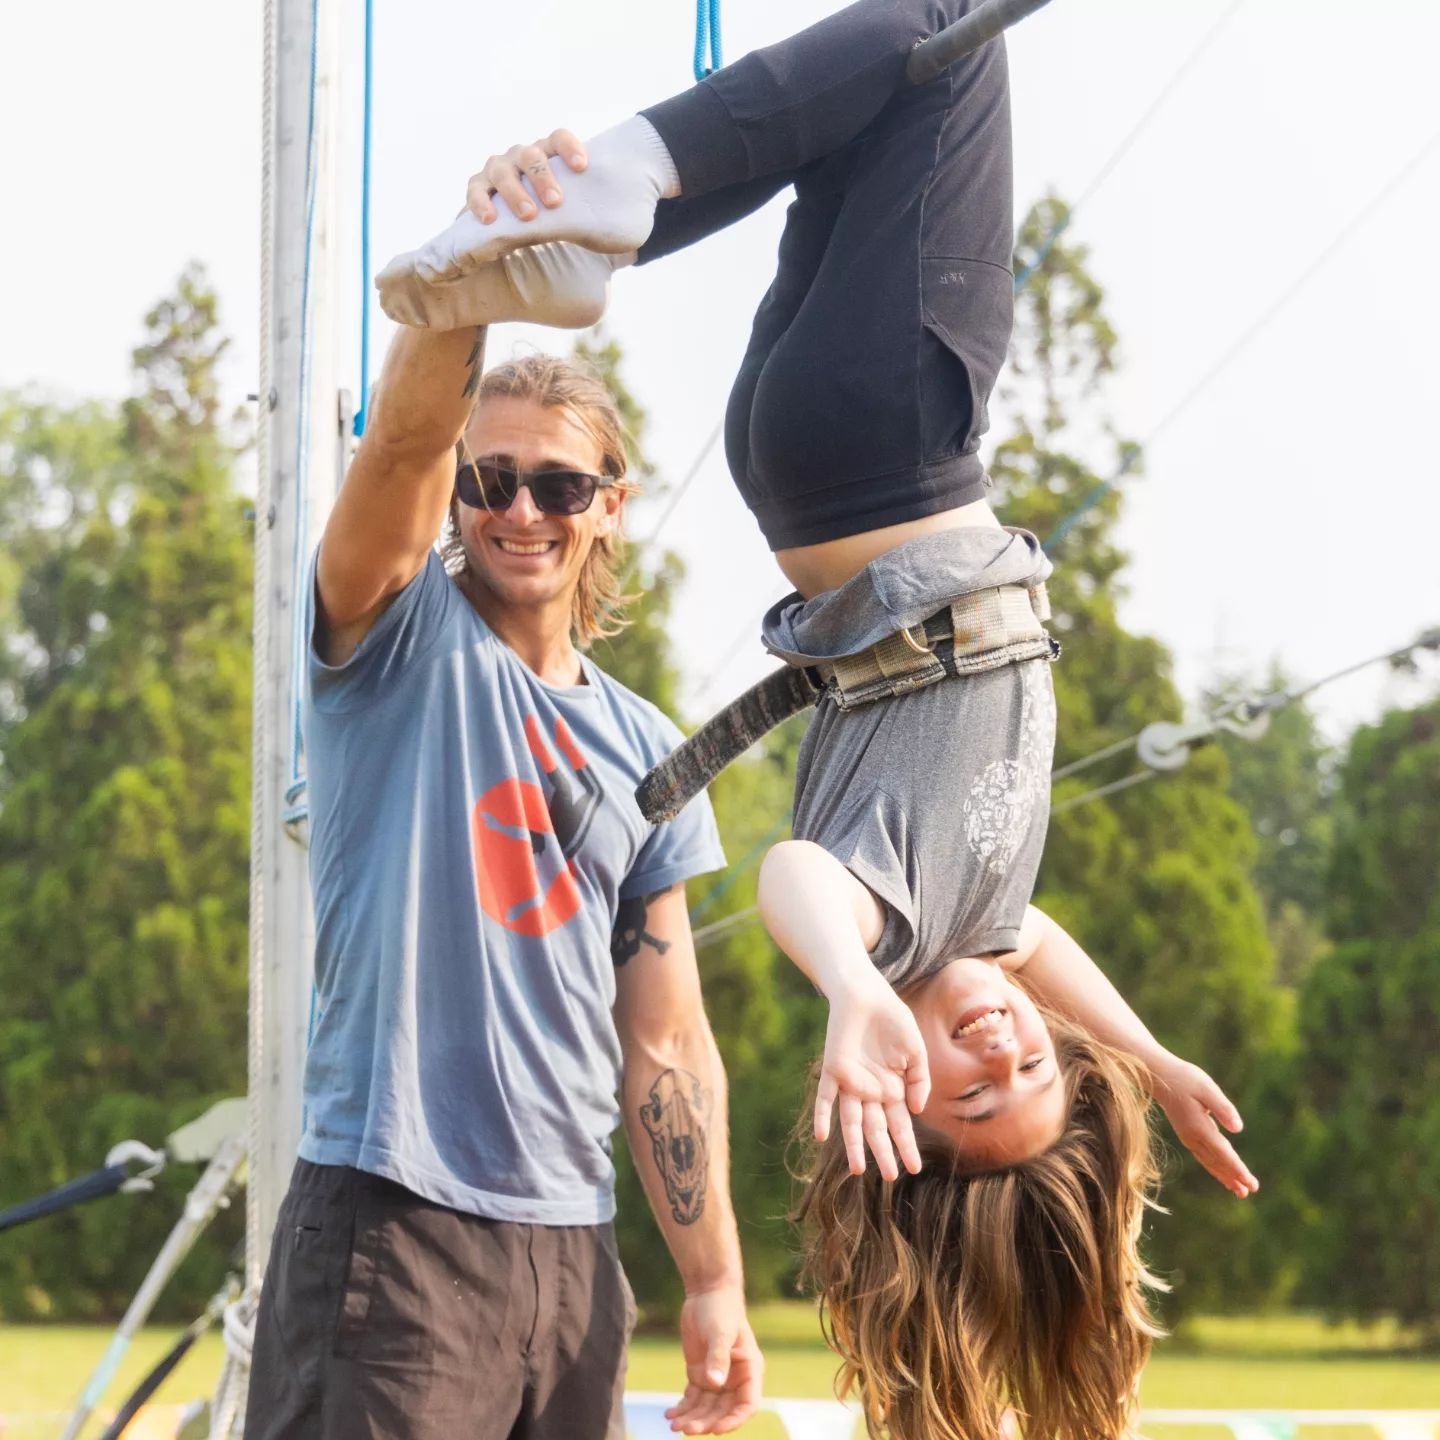 Check out these photos from our new photographer @zminskoff 

You can get your own amazing photos professionally taken by Zach on your next class. Sign up today!

Now with D R O N E S

#robotsarecomingforyourjob #flyingtrapeze #summervibes #hamptons 